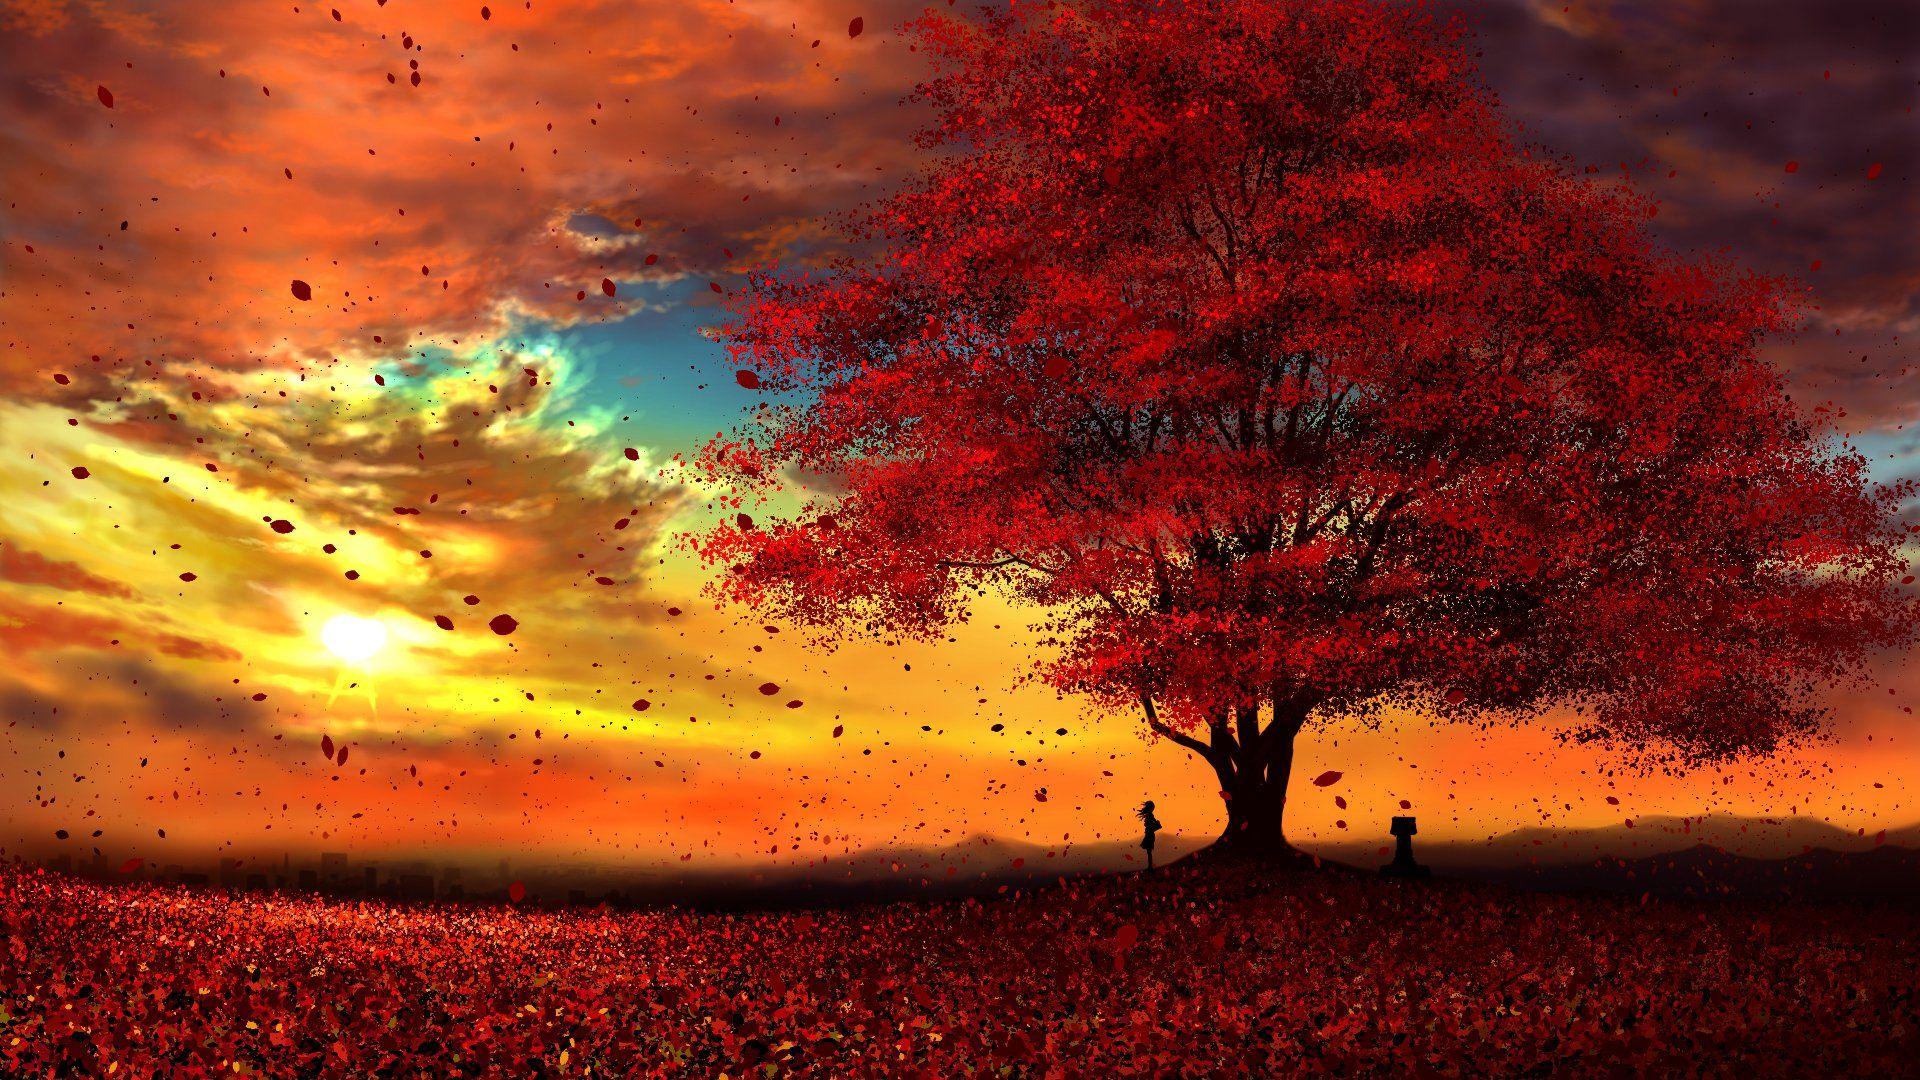 Autumn Leaves Wall 4K wallpaper download